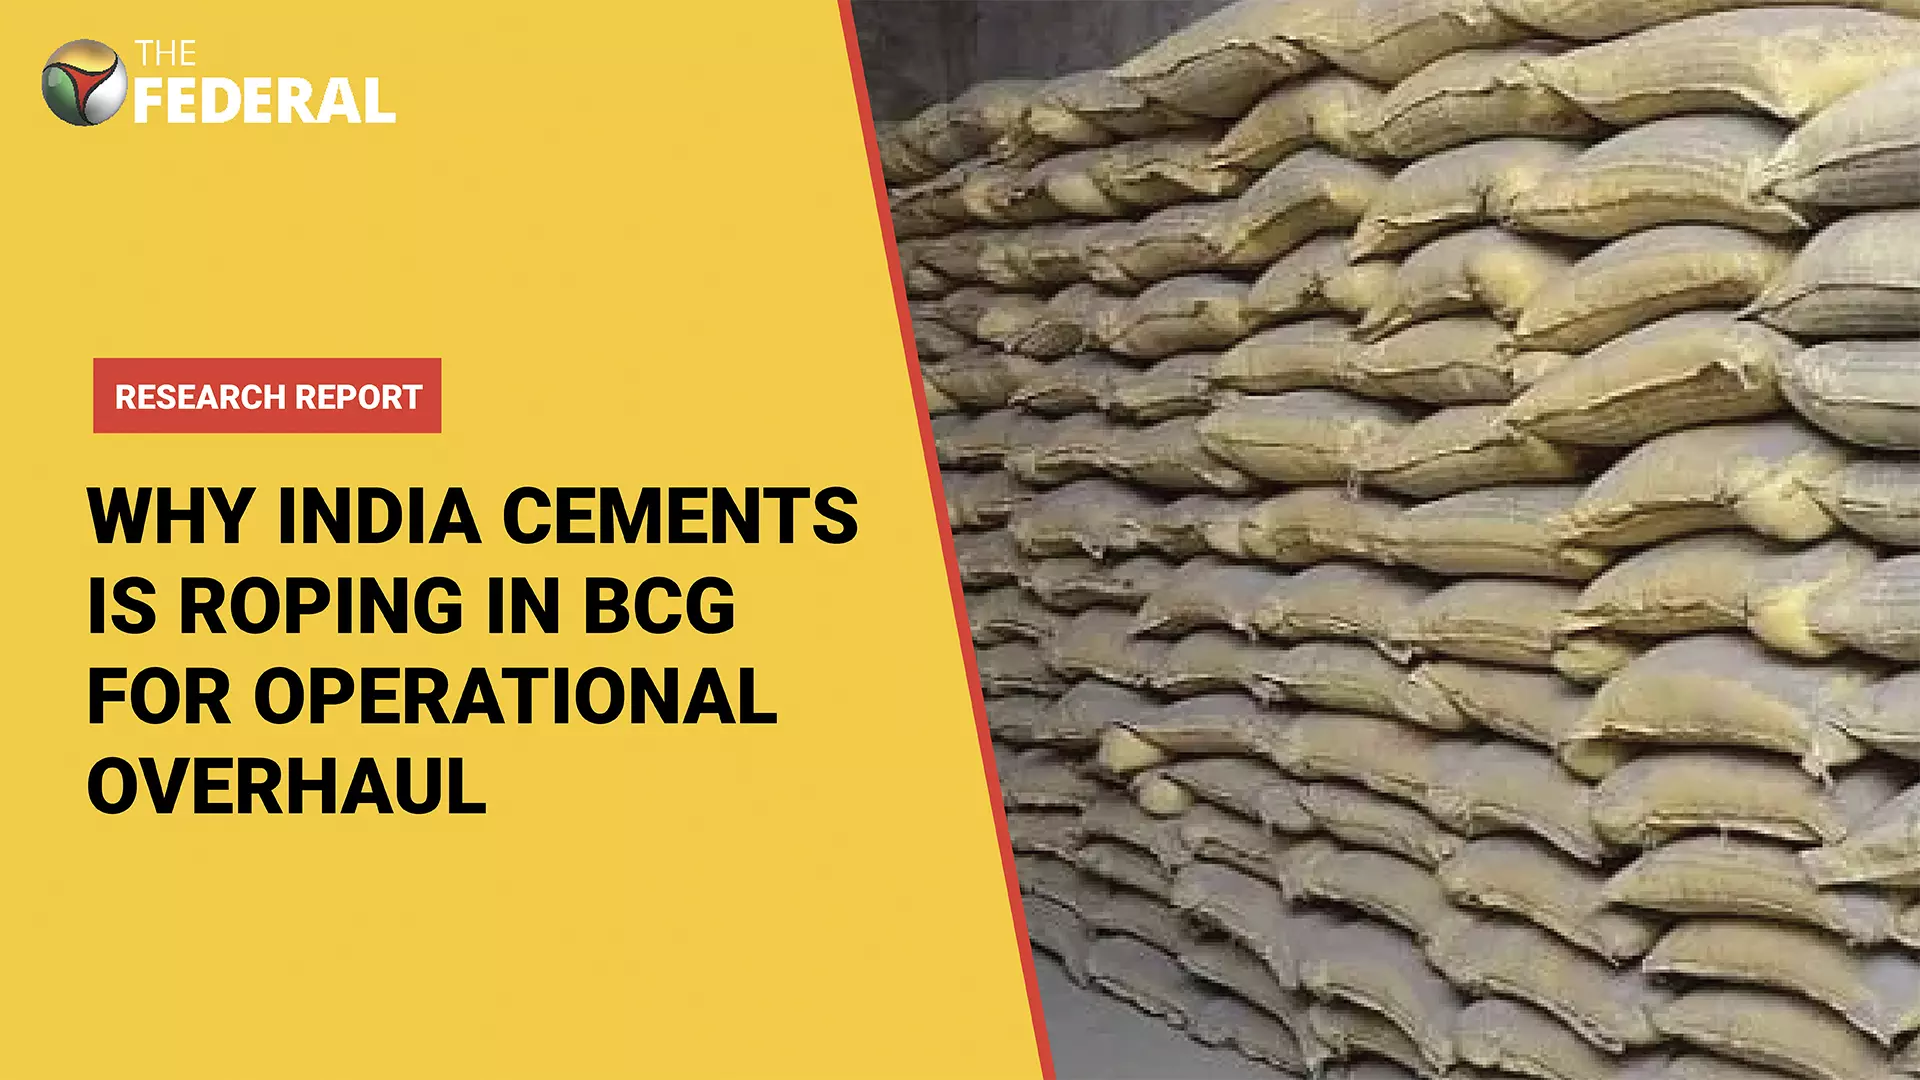 Why India Cements is roping in BCG for operational overhaul